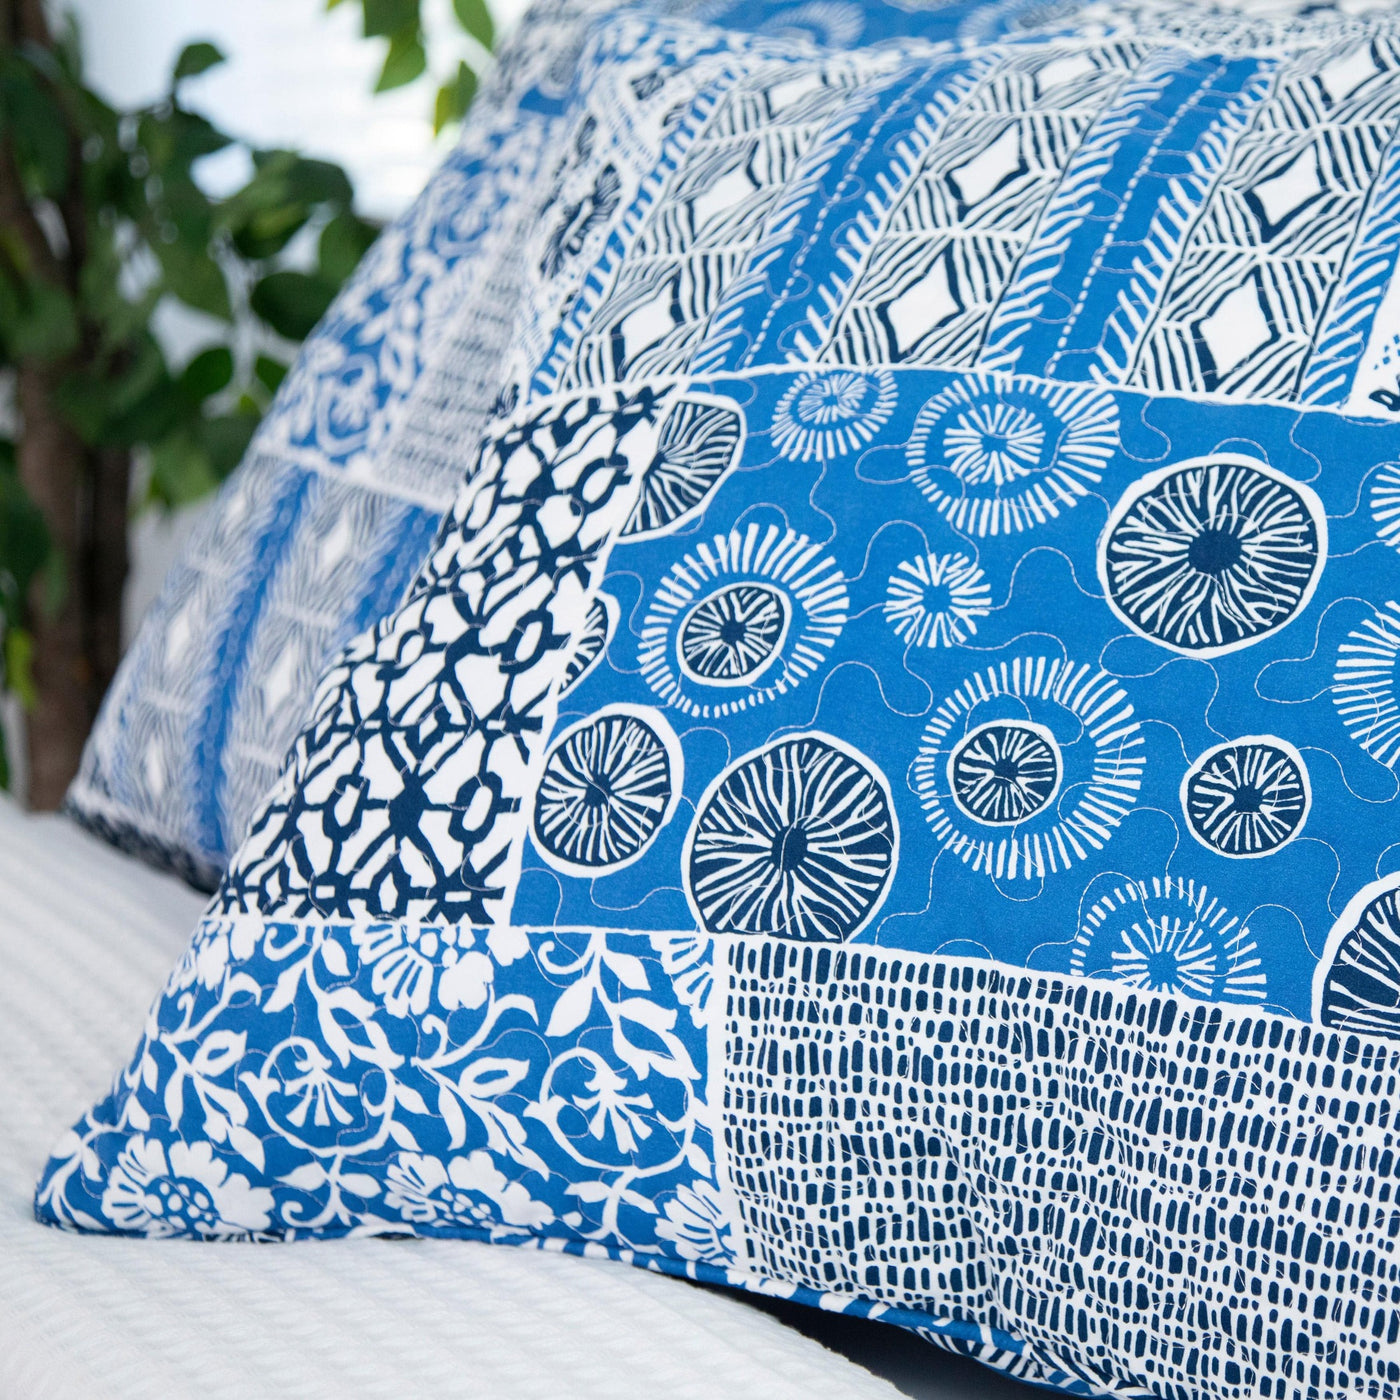 Details and Print Pattern of Global Patch Quilted Sham Covers in Blue#color_global-patch-blue